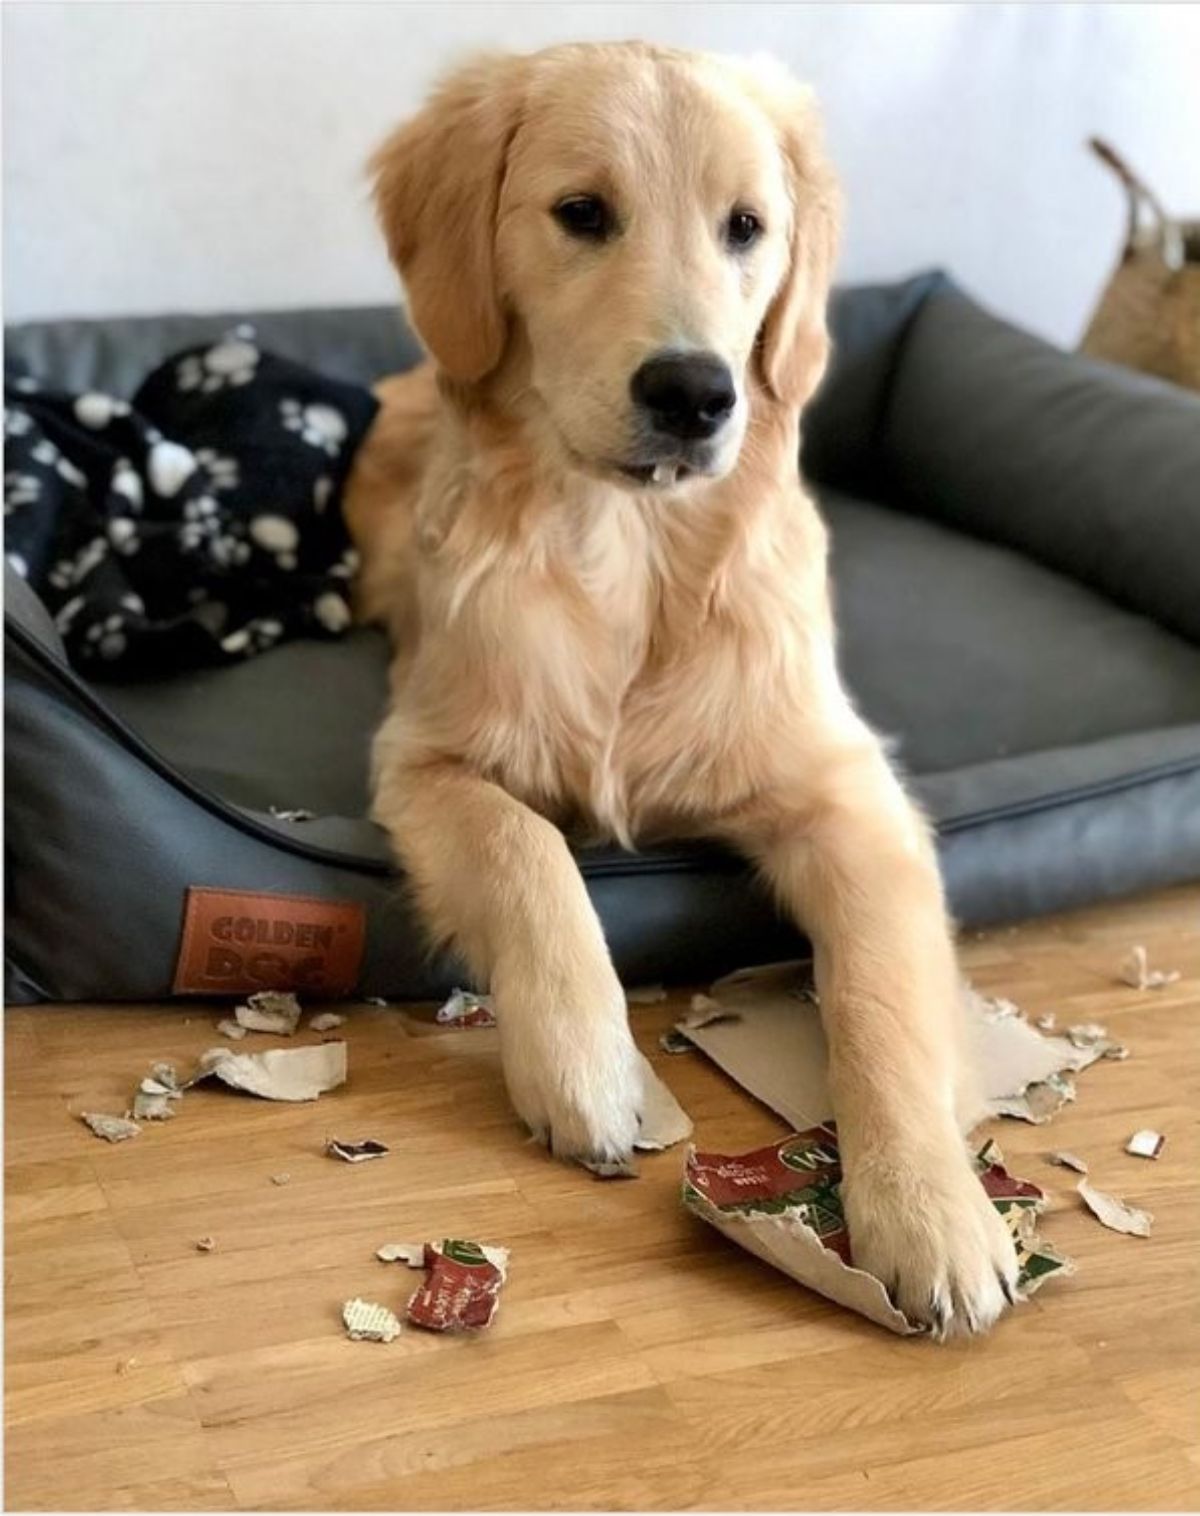 golden retriever puppy laying on a black dog bed with a ripped up cardboard box in front